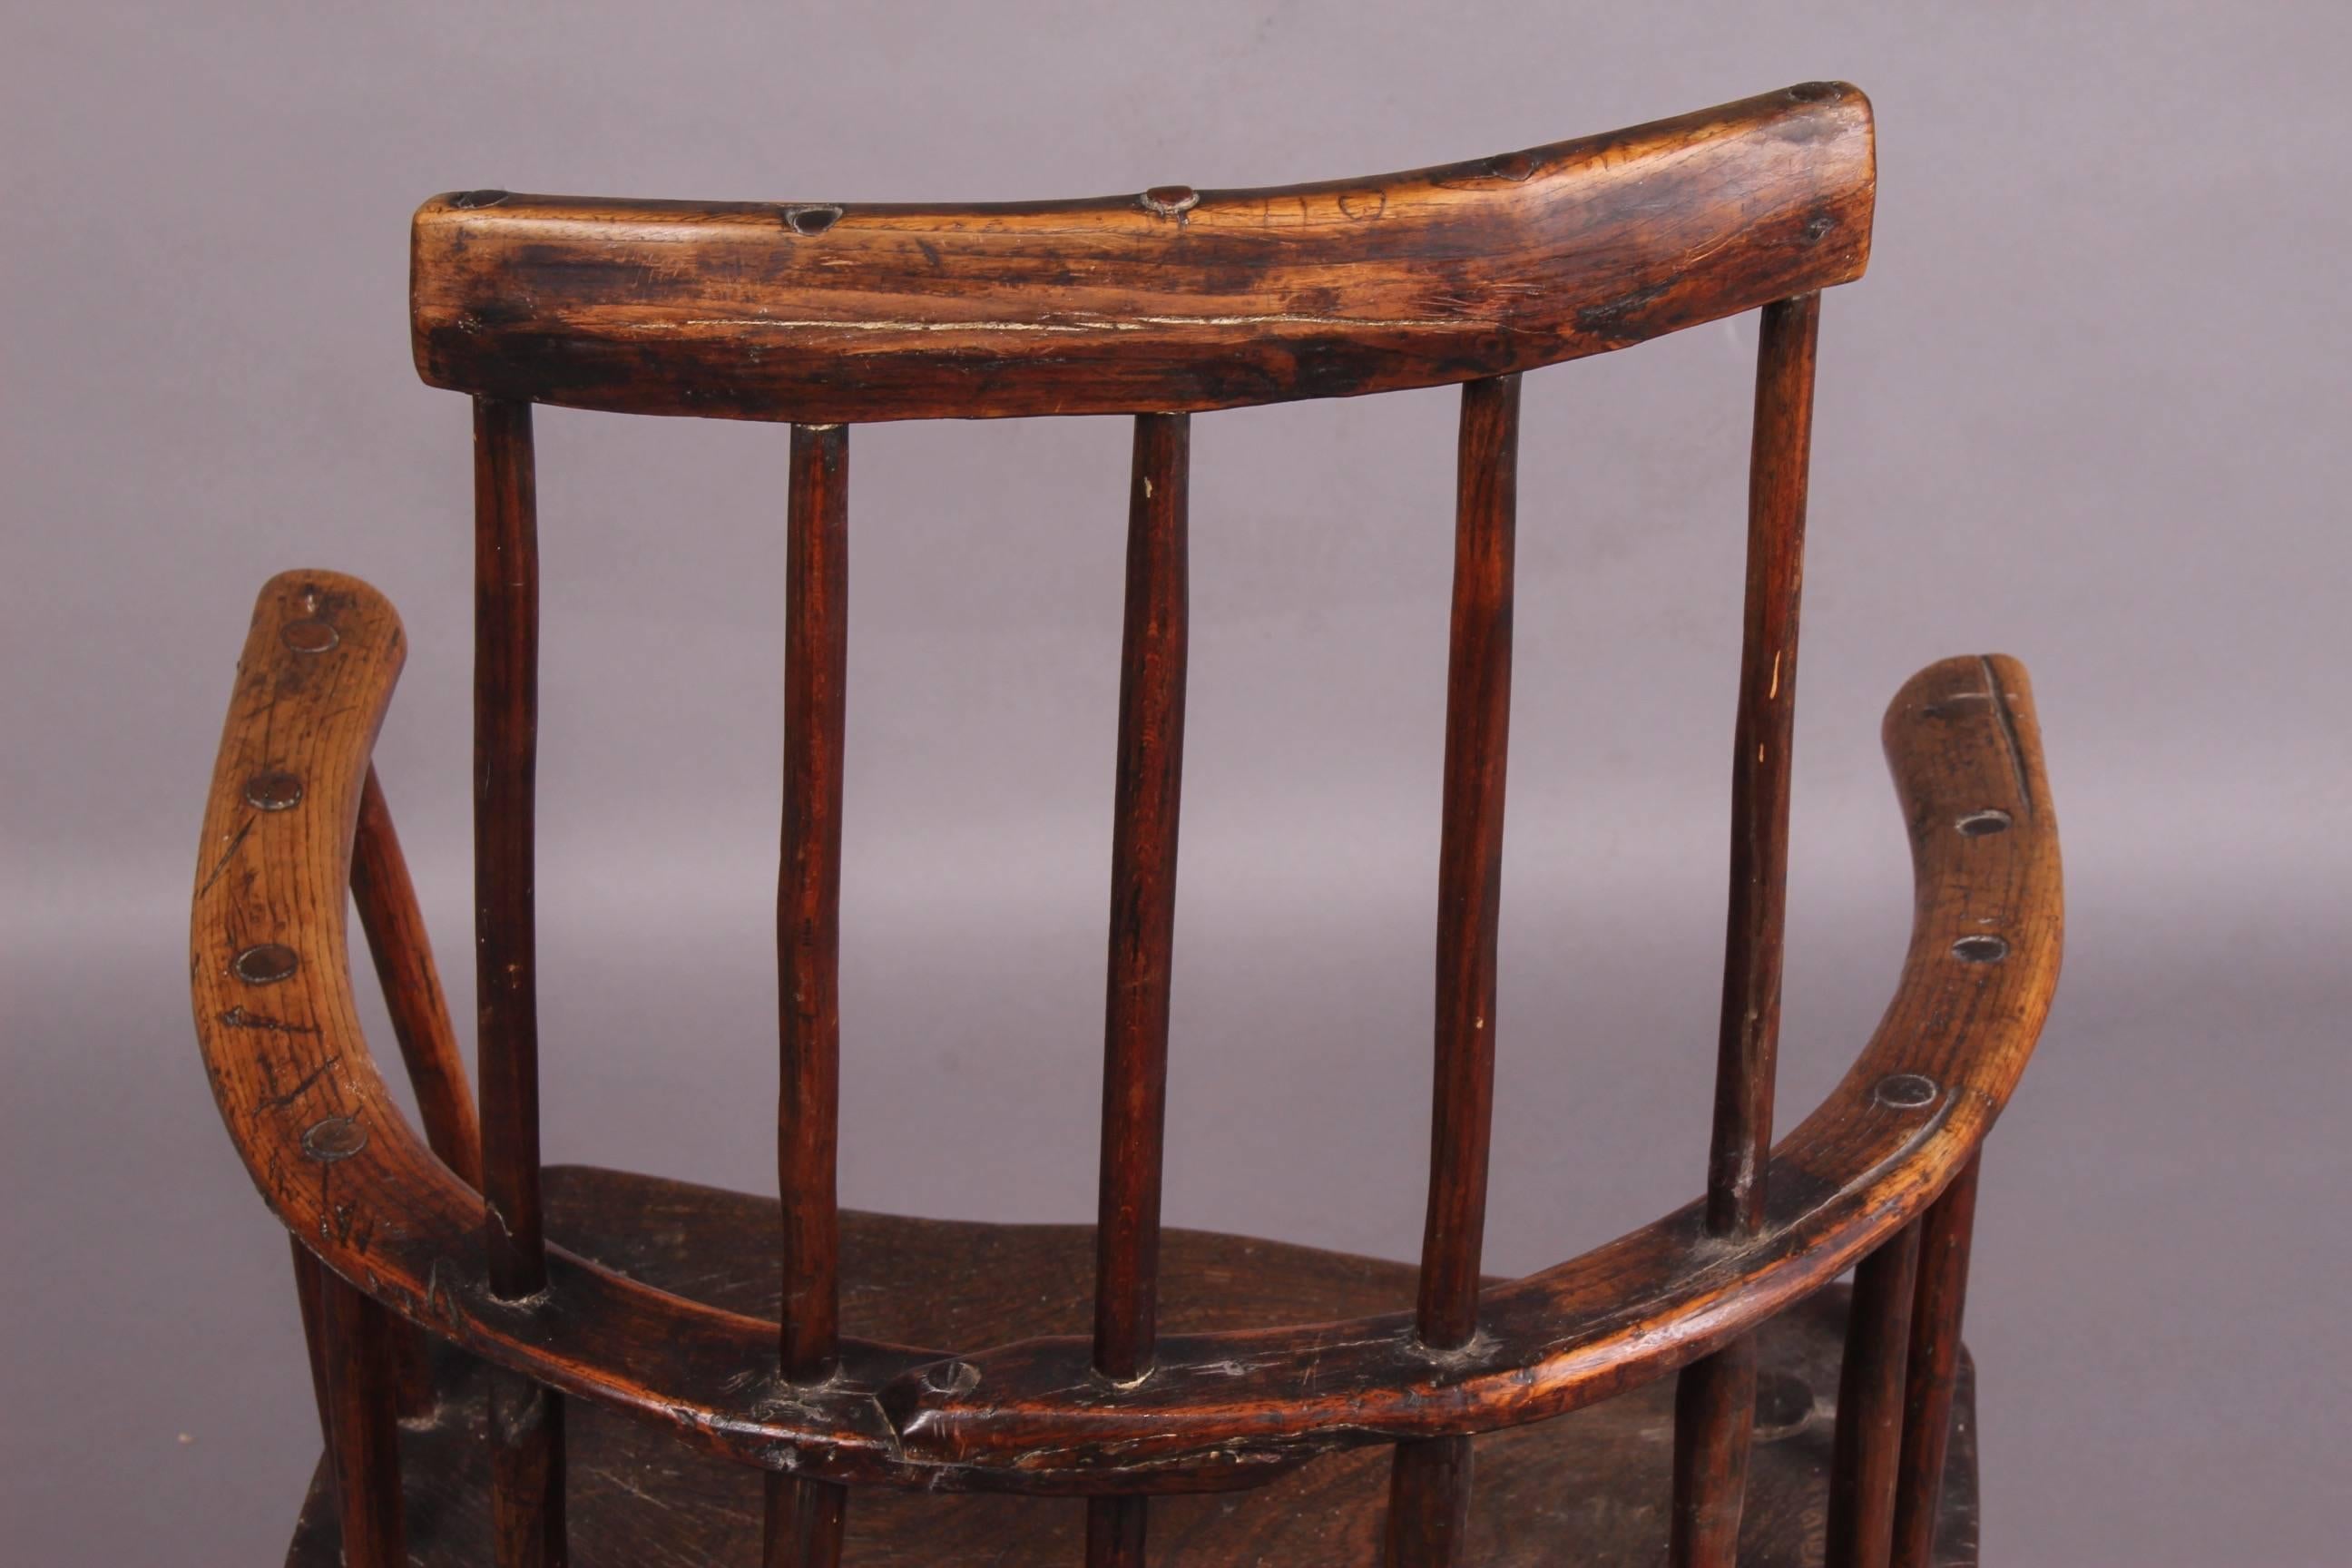 English country Windsor armchair.